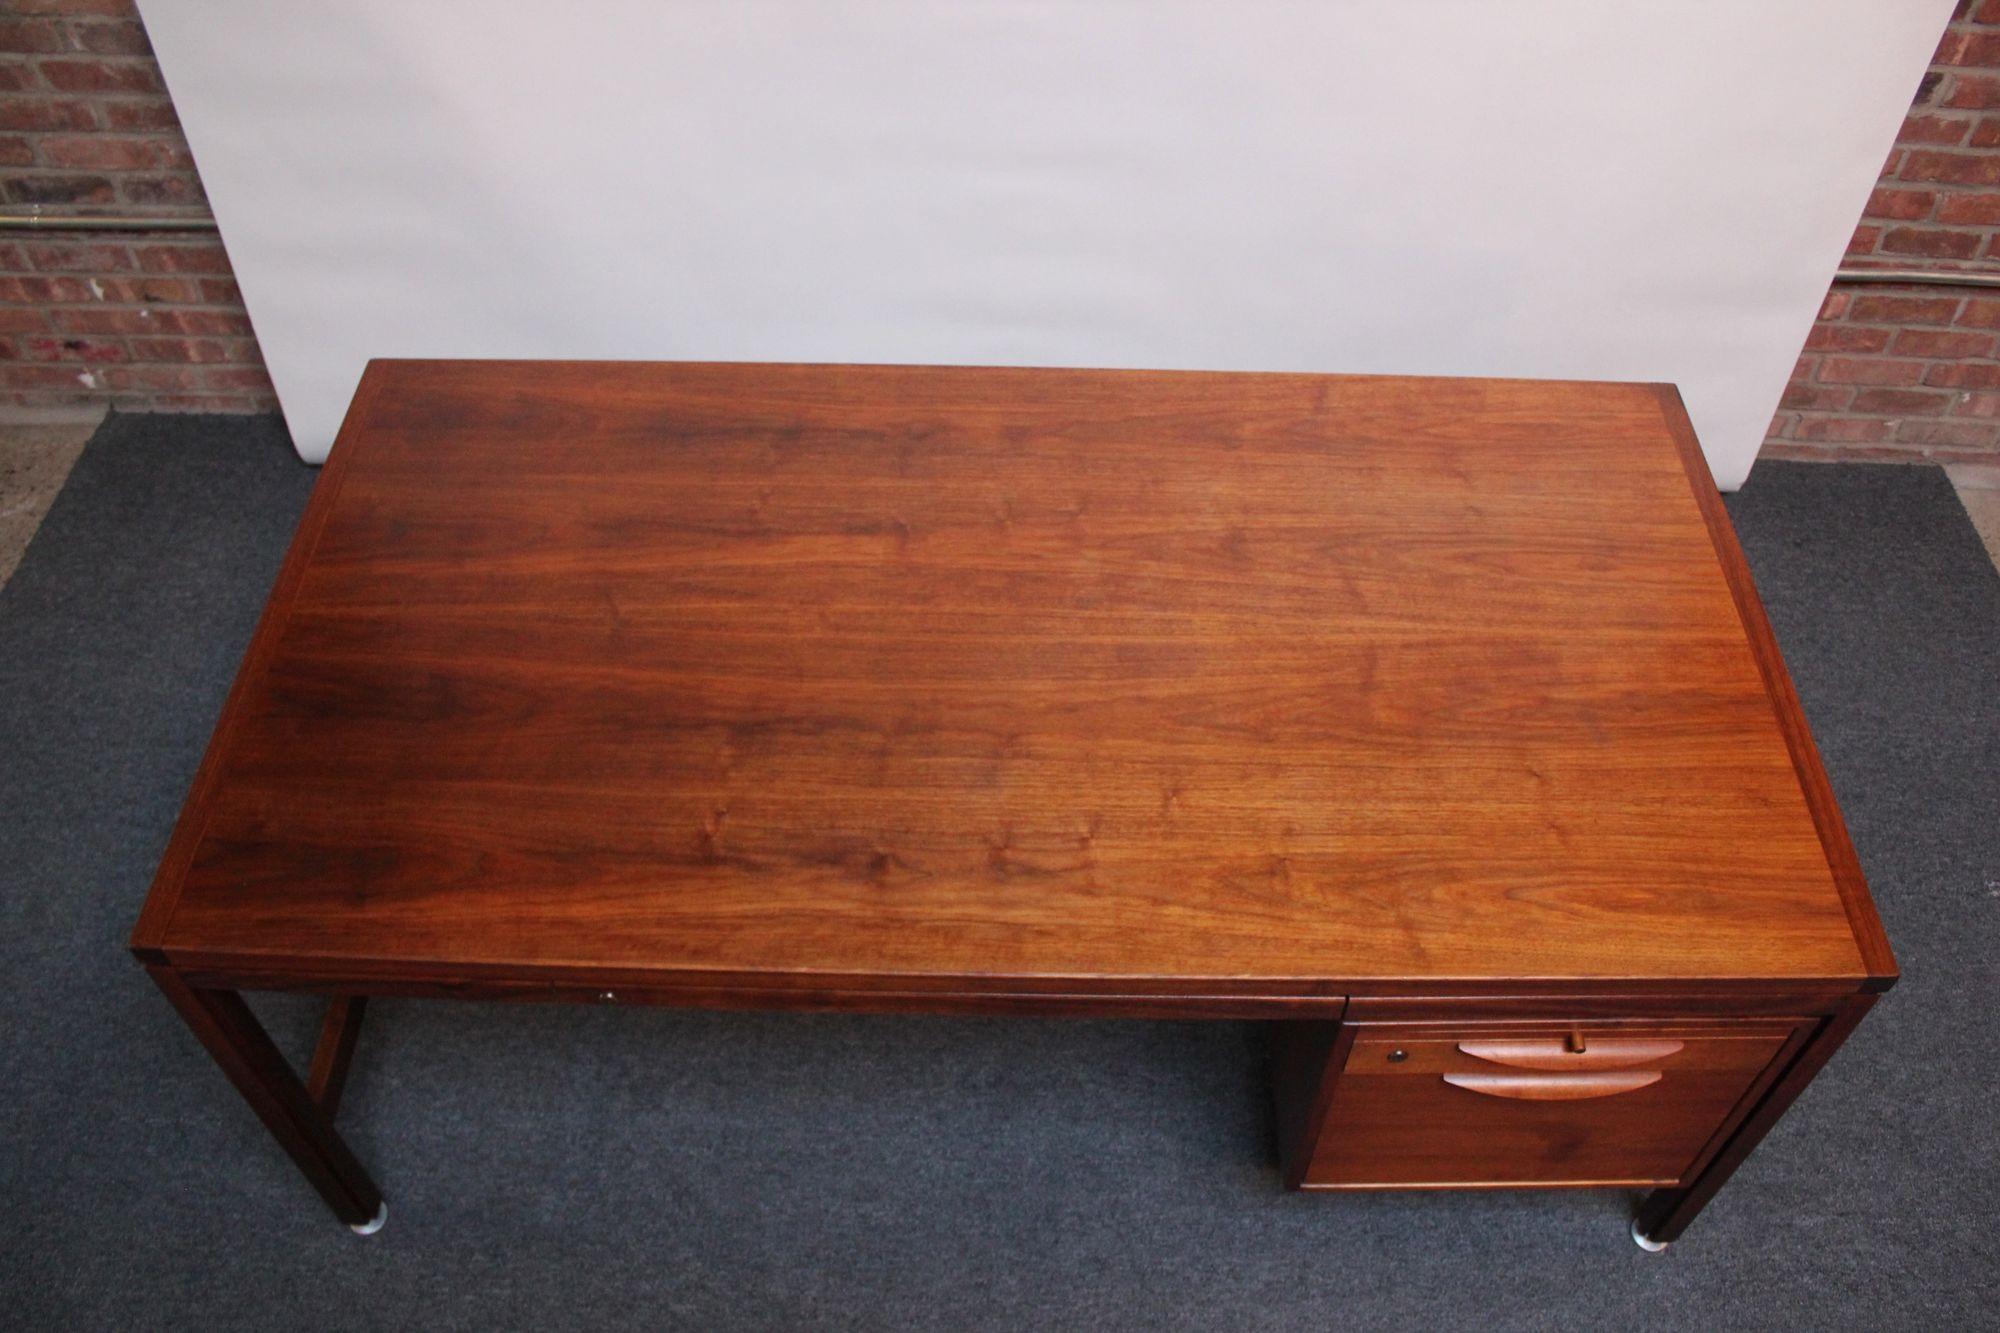 American Mid-Century Modern Walnut Executive Desk with File Cabinet Drawer by Jens Risom